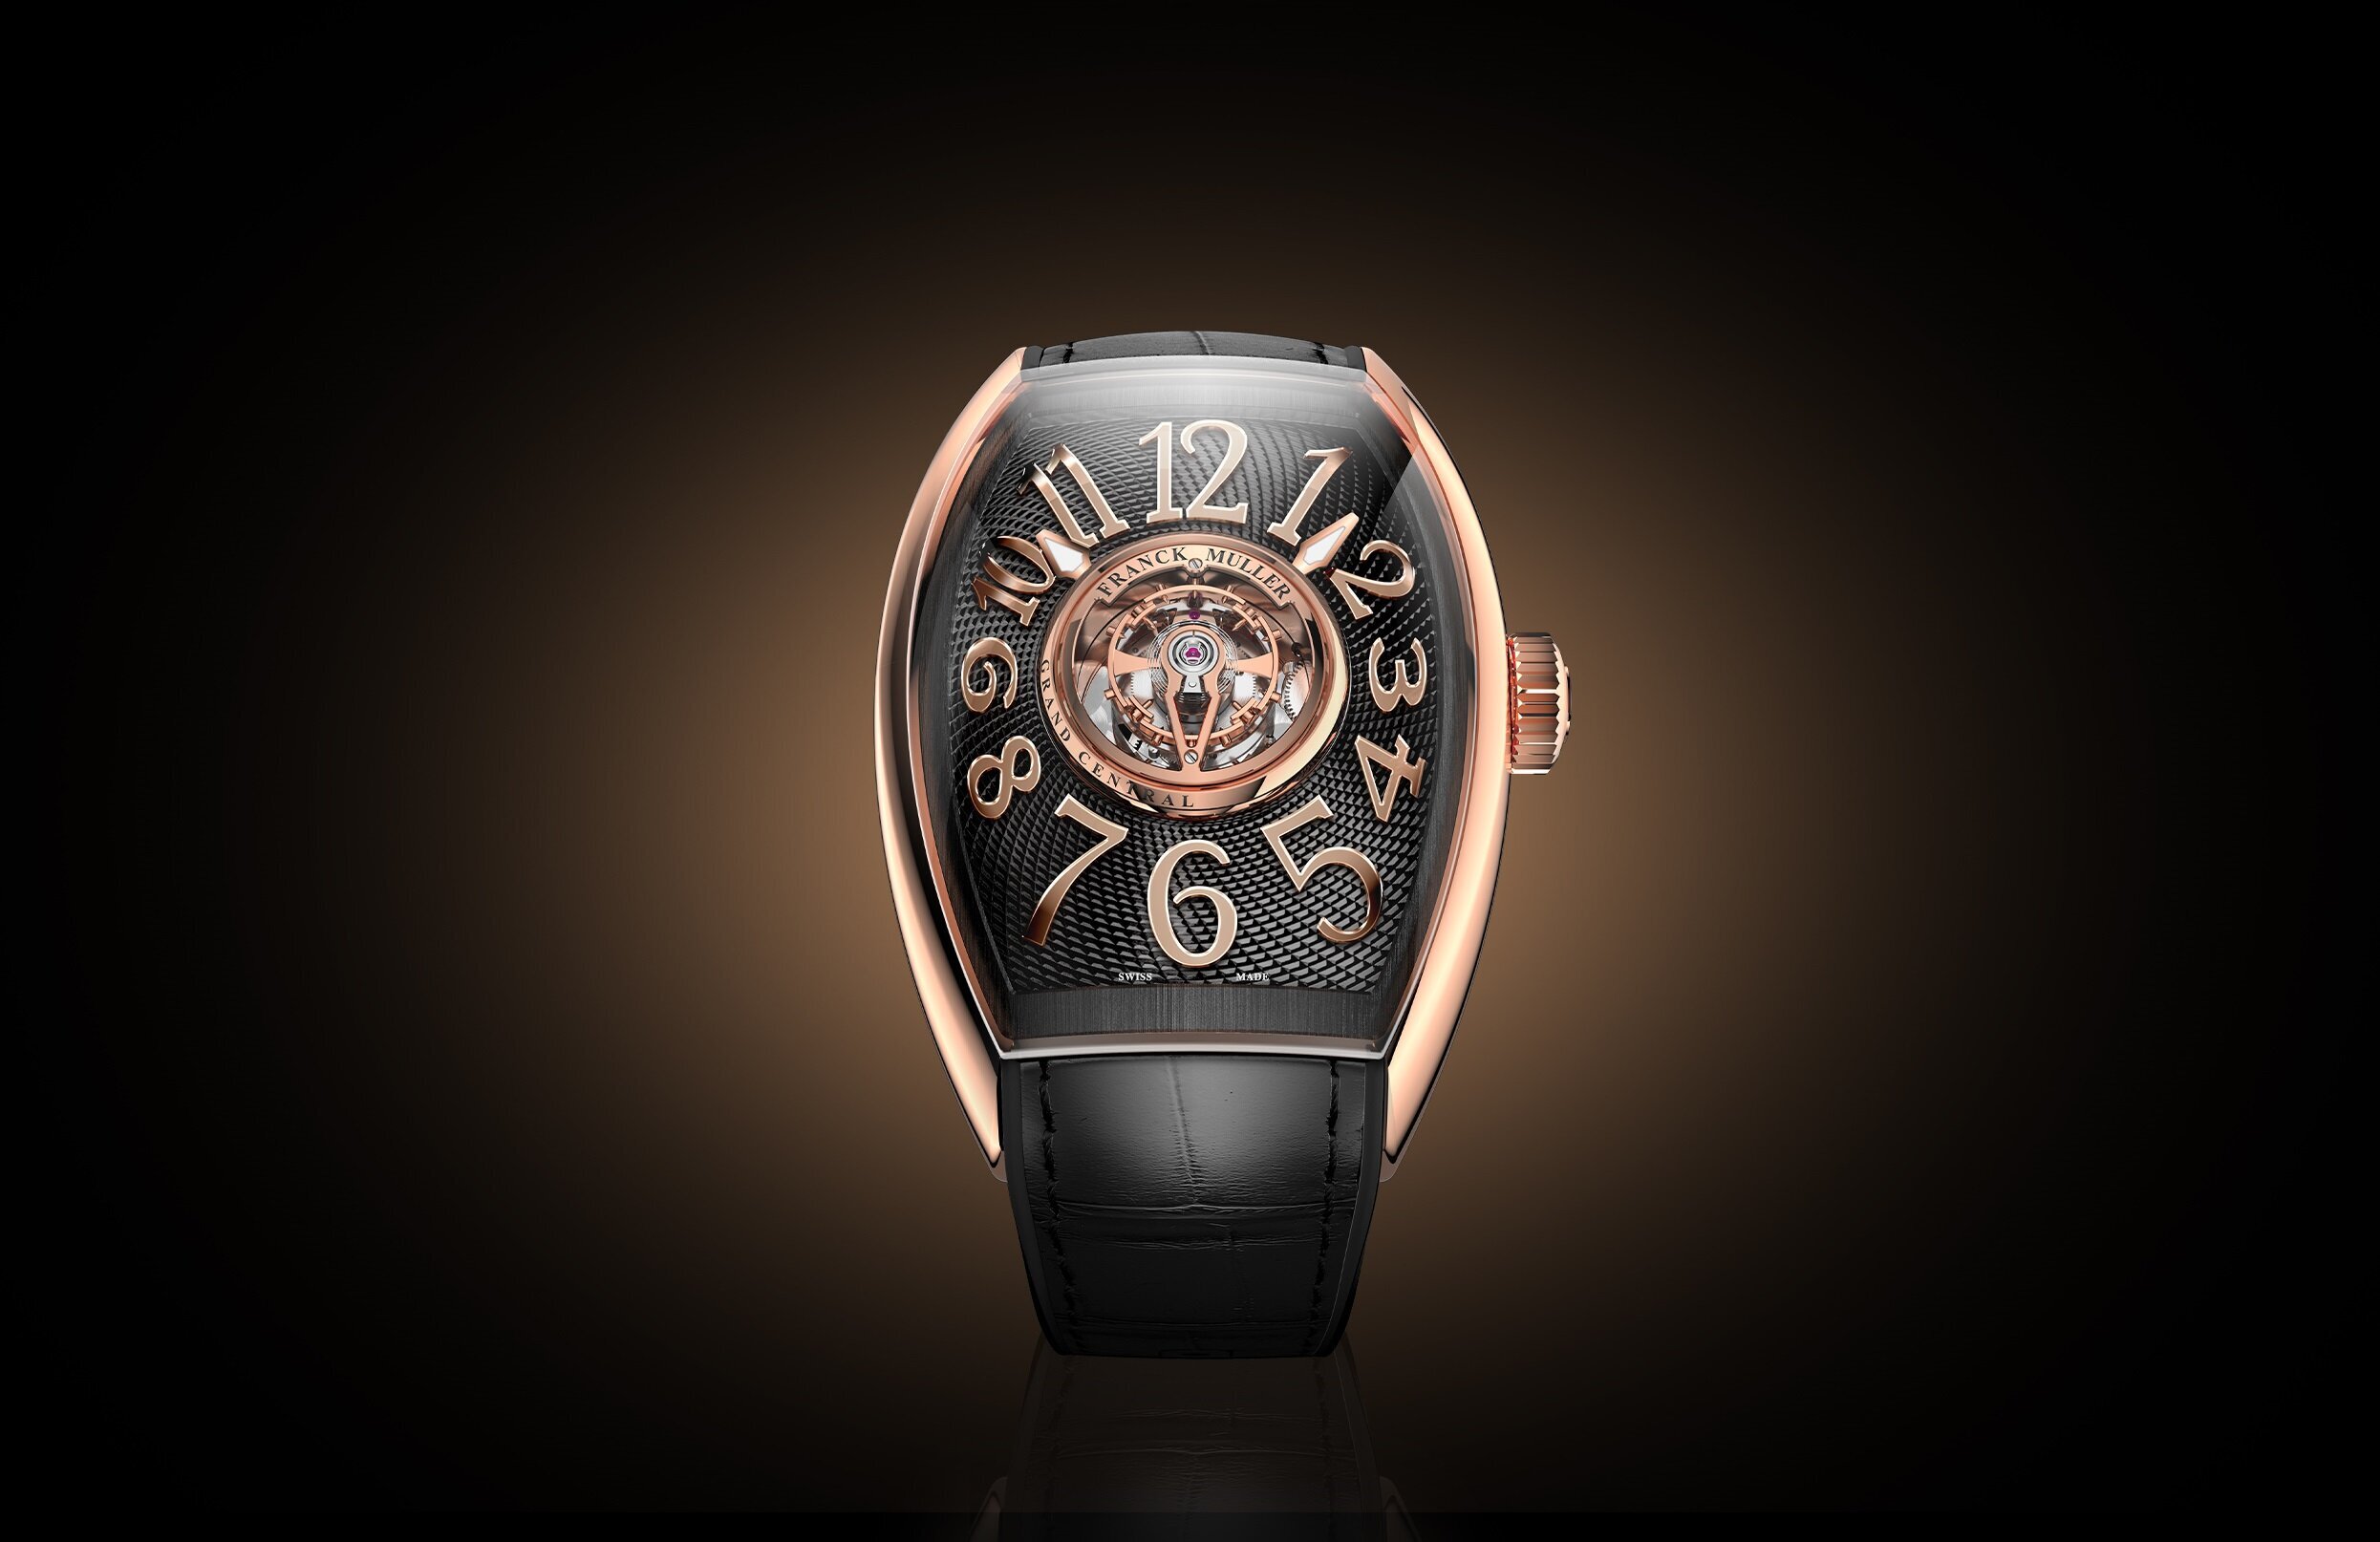 The 8 Attributes of Franck Muller Watches That Makes It Unique